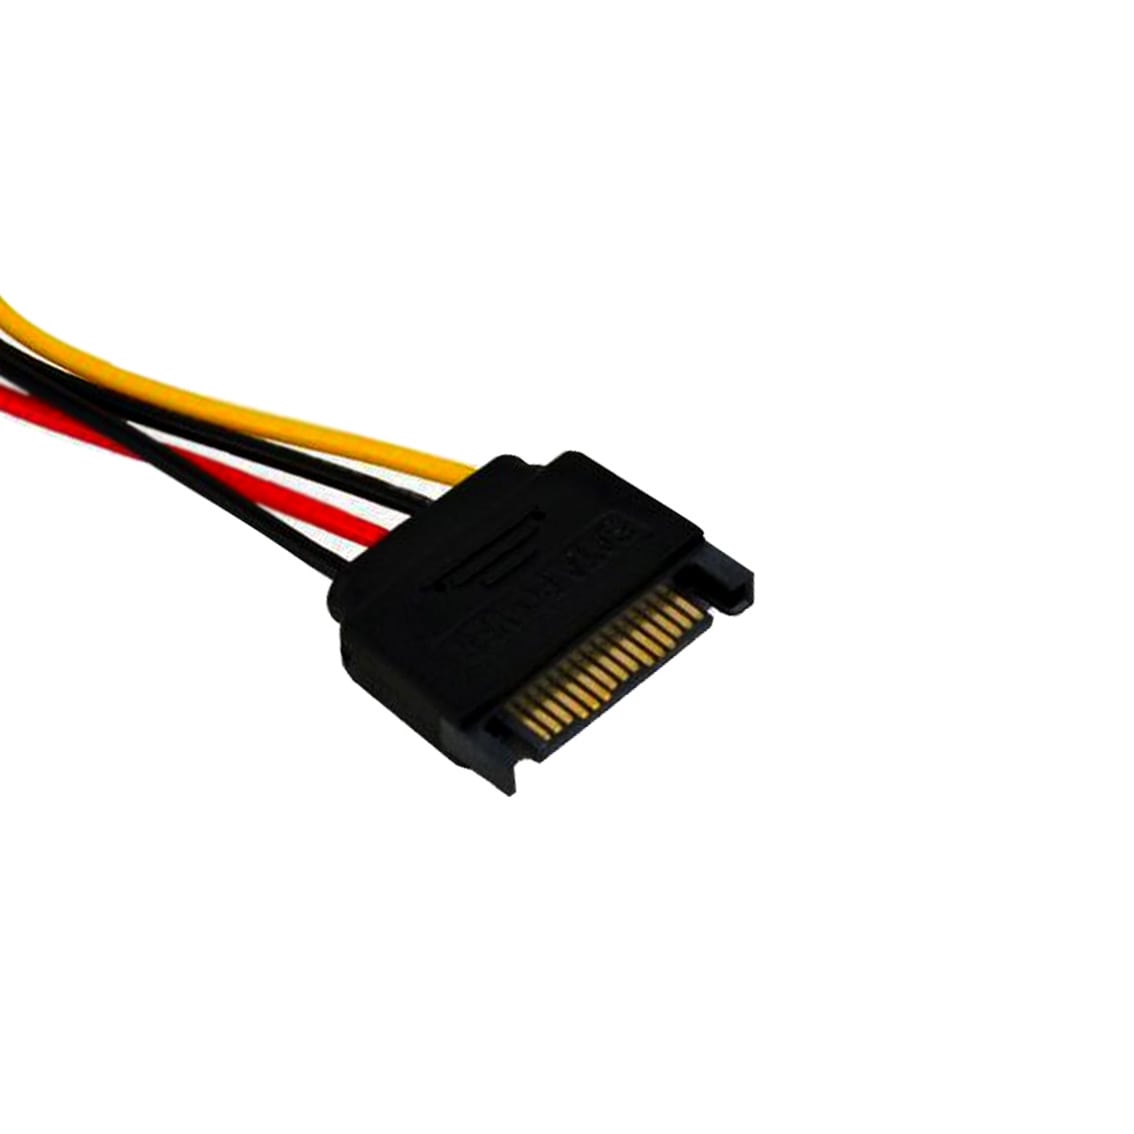 IDE Molex 4 pin Male to Sata 15 pin Female Power Adapter Cable lot wholesale 